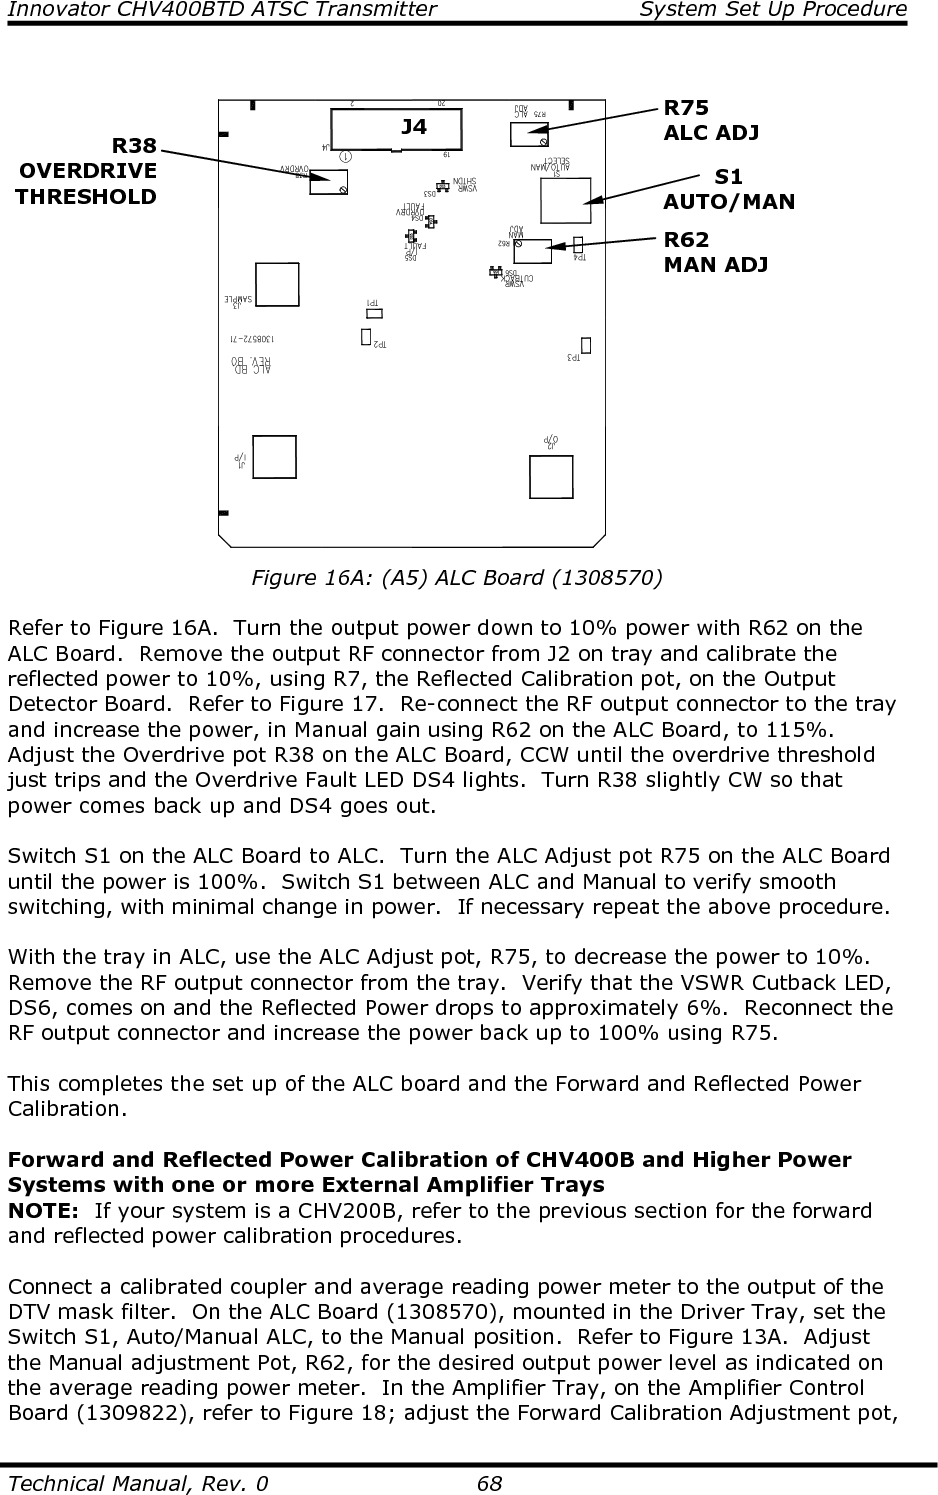 Innovator CHV400BTD ATSC Transmitter  System Set Up Procedure  Technical Manual, Rev. 0    68   Figure 16A: (A5) ALC Board (1308570)  Refer to Figure 16A.  Turn the output power down to 10% power with R62 on the ALC Board.  Remove the output RF connector from J2 on tray and calibrate the reflected power to 10%, using R7, the Reflected Calibration pot, on the Output Detector Board.  Refer to Figure 17.  Re-connect the RF output connector to the tray and increase the power, in Manual gain using R62 on the ALC Board, to 115%.  Adjust the Overdrive pot R38 on the ALC Board, CCW until the overdrive threshold just trips and the Overdrive Fault LED DS4 lights.  Turn R38 slightly CW so that power comes back up and DS4 goes out.  Switch S1 on the ALC Board to ALC.  Turn the ALC Adjust pot R75 on the ALC Board until the power is 100%.  Switch S1 between ALC and Manual to verify smooth switching, with minimal change in power.  If necessary repeat the above procedure.  With the tray in ALC, use the ALC Adjust pot, R75, to decrease the power to 10%.  Remove the RF output connector from the tray.  Verify that the VSWR Cutback LED, DS6, comes on and the Reflected Power drops to approximately 6%.  Reconnect the RF output connector and increase the power back up to 100% using R75.  This completes the set up of the ALC board and the Forward and Reflected Power Calibration.  Forward and Reflected Power Calibration of CHV400B and Higher Power Systems with one or more External Amplifier Trays NOTE:  If your system is a CHV200B, refer to the previous section for the forward and reflected power calibration procedures.  Connect a calibrated coupler and average reading power meter to the output of the DTV mask filter.  On the ALC Board (1308570), mounted in the Driver Tray, set the Switch S1, Auto/Manual ALC, to the Manual position.  Refer to Figure 13A.  Adjust the Manual adjustment Pot, R62, for the desired output power level as indicated on the average reading power meter.  In the Amplifier Tray, on the Amplifier Control Board (1309822), refer to Figure 18; adjust the Forward Calibration Adjustment pot, R38 OVERDRIVE THRESHOLD S1 AUTO/MAN R75 ALC ADJ R62 MAN ADJ J4 